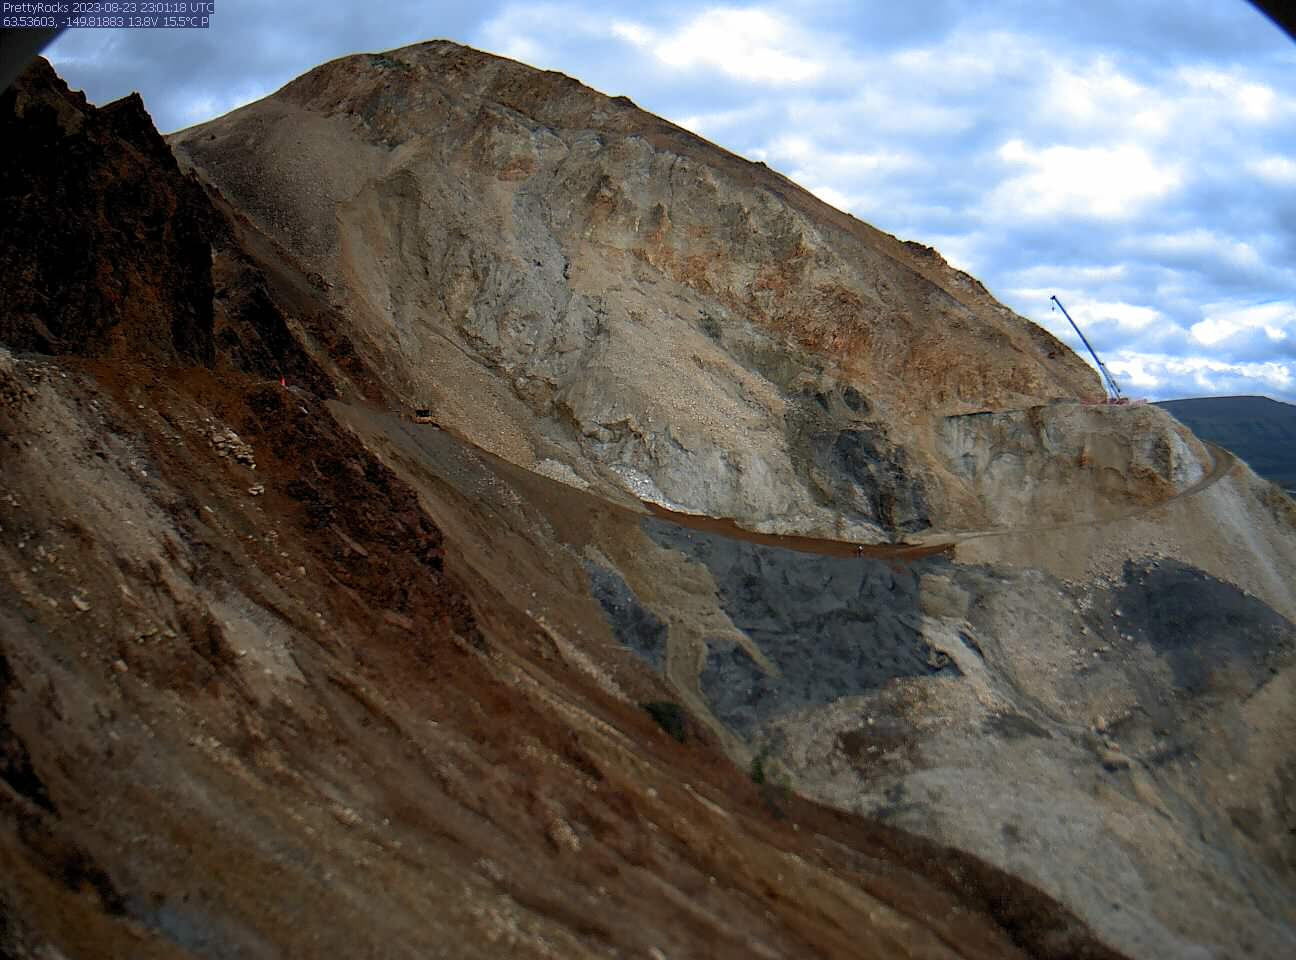 A face-on view of the Pretty Rocks landslide with a steep, sloping bench cut into the mountainside connecting the flat road on each side of the landslide.